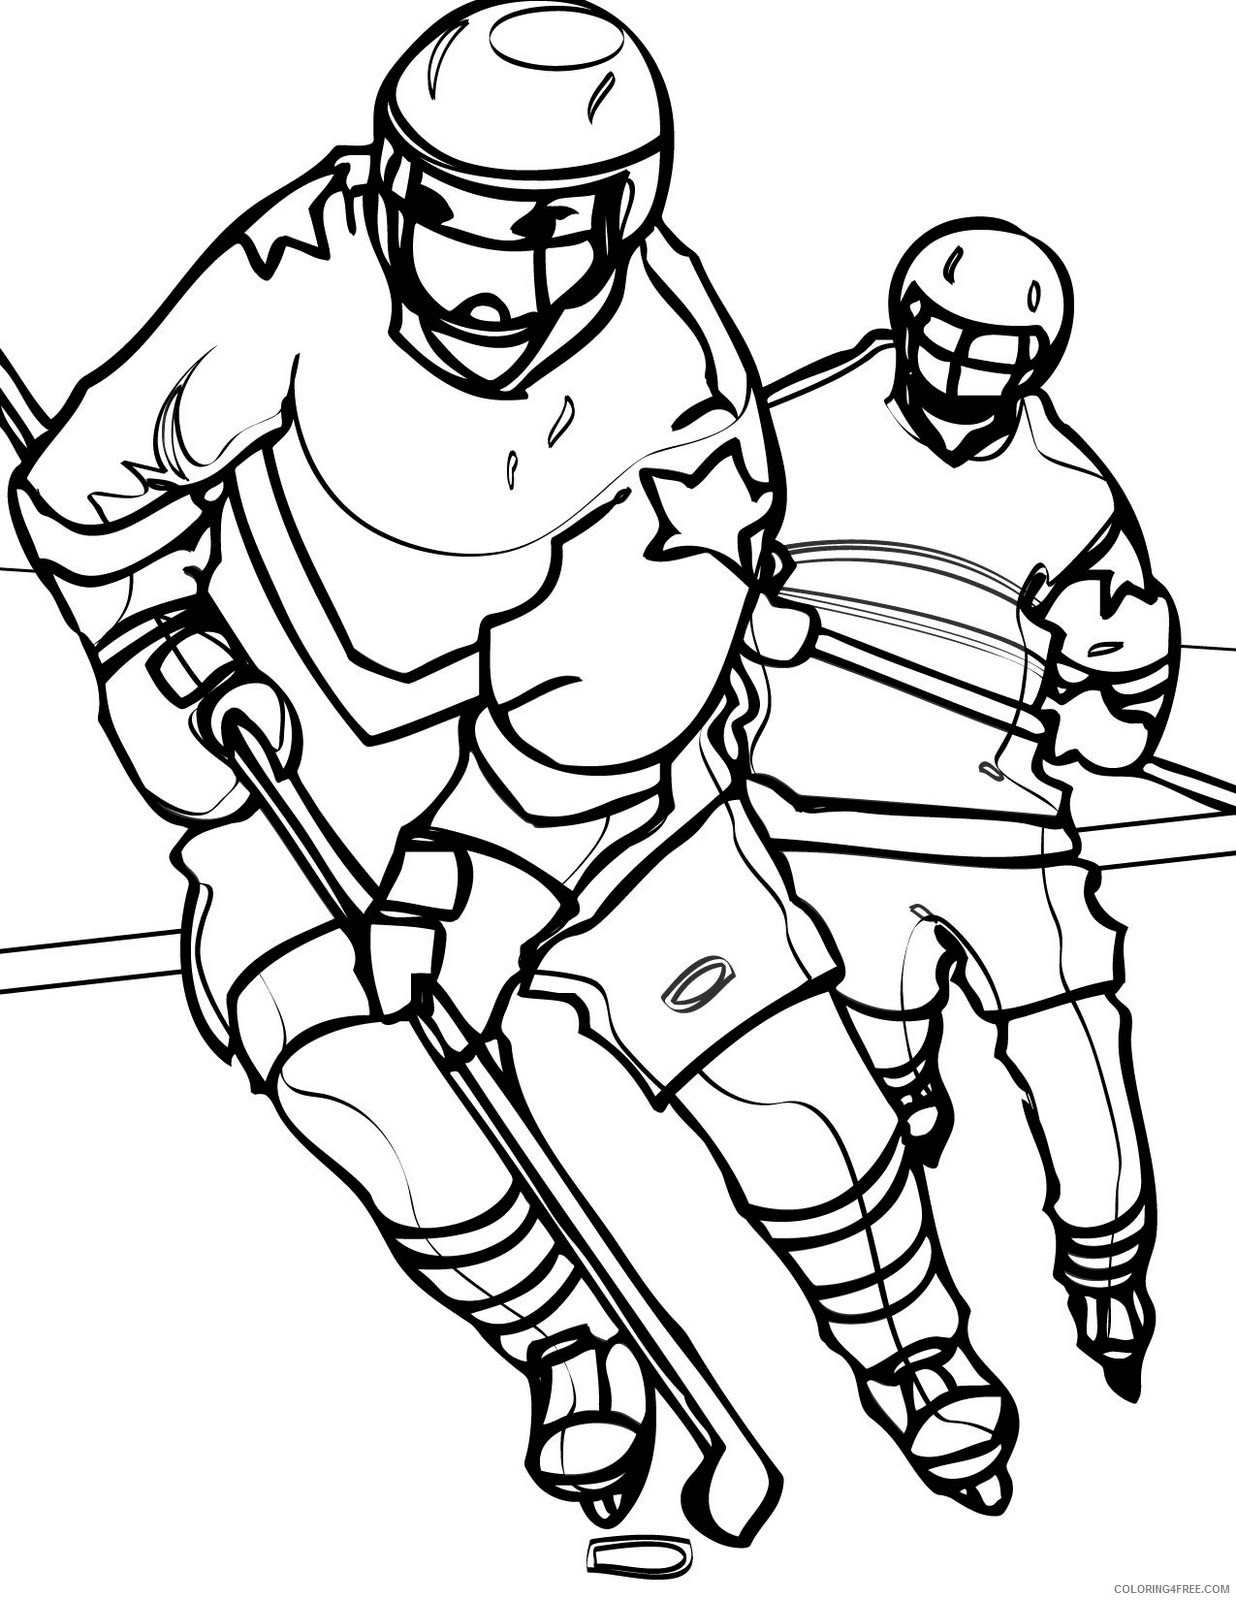 hockey coloring pages nhl Coloring4free